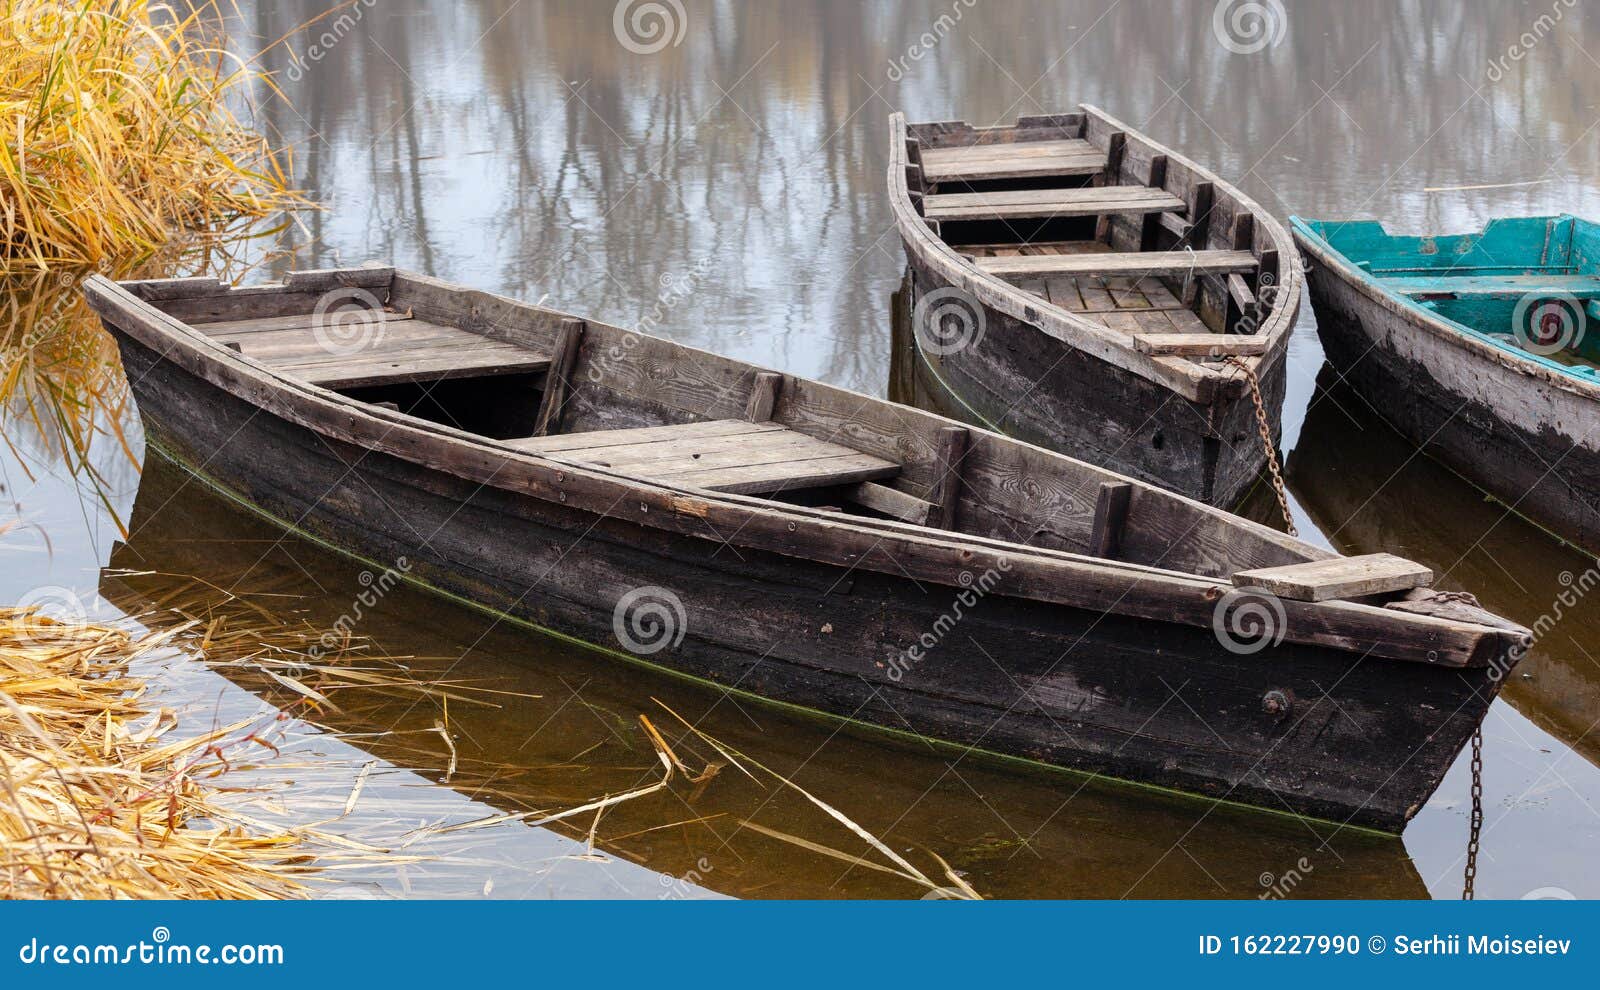 https://thumbs.dreamstime.com/z/wooden-boats-river-autumn-closeup-old-wooden-fishing-boats-river-fall-reflections-trees-water-162227990.jpg